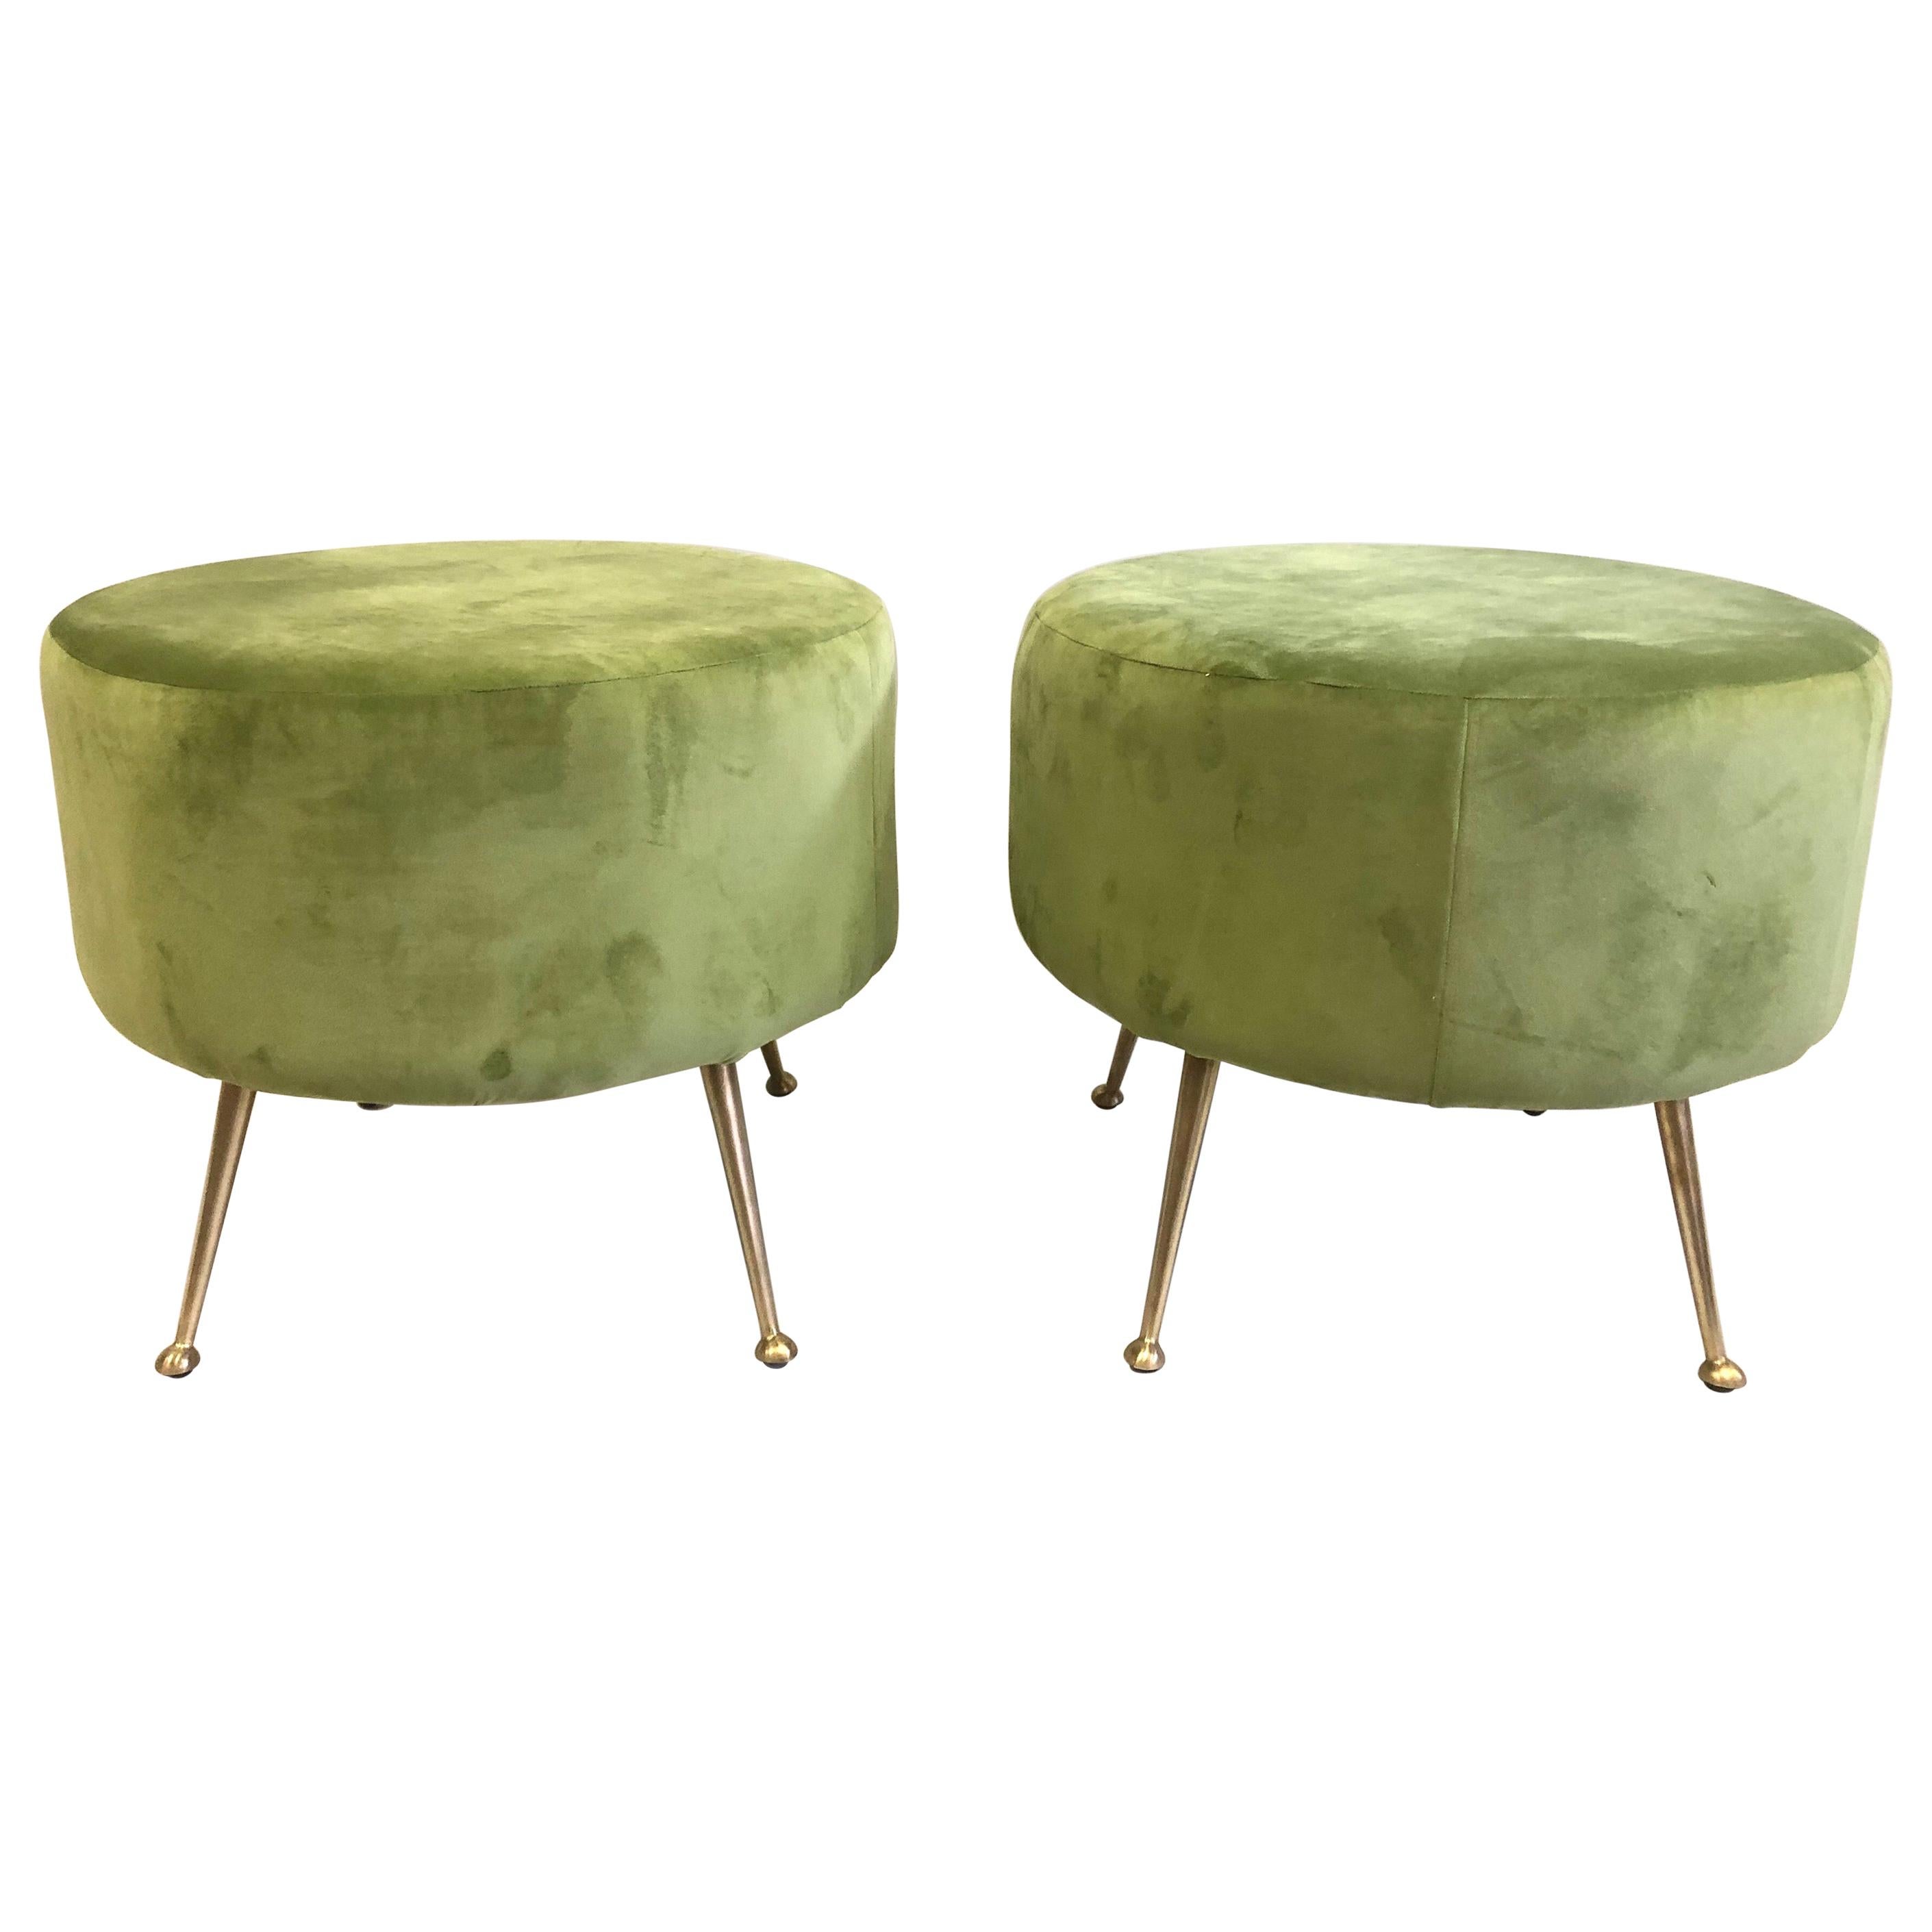 Pair of Mid-Century Modern Round Stools or Benches Attributed to Marco Zanuso